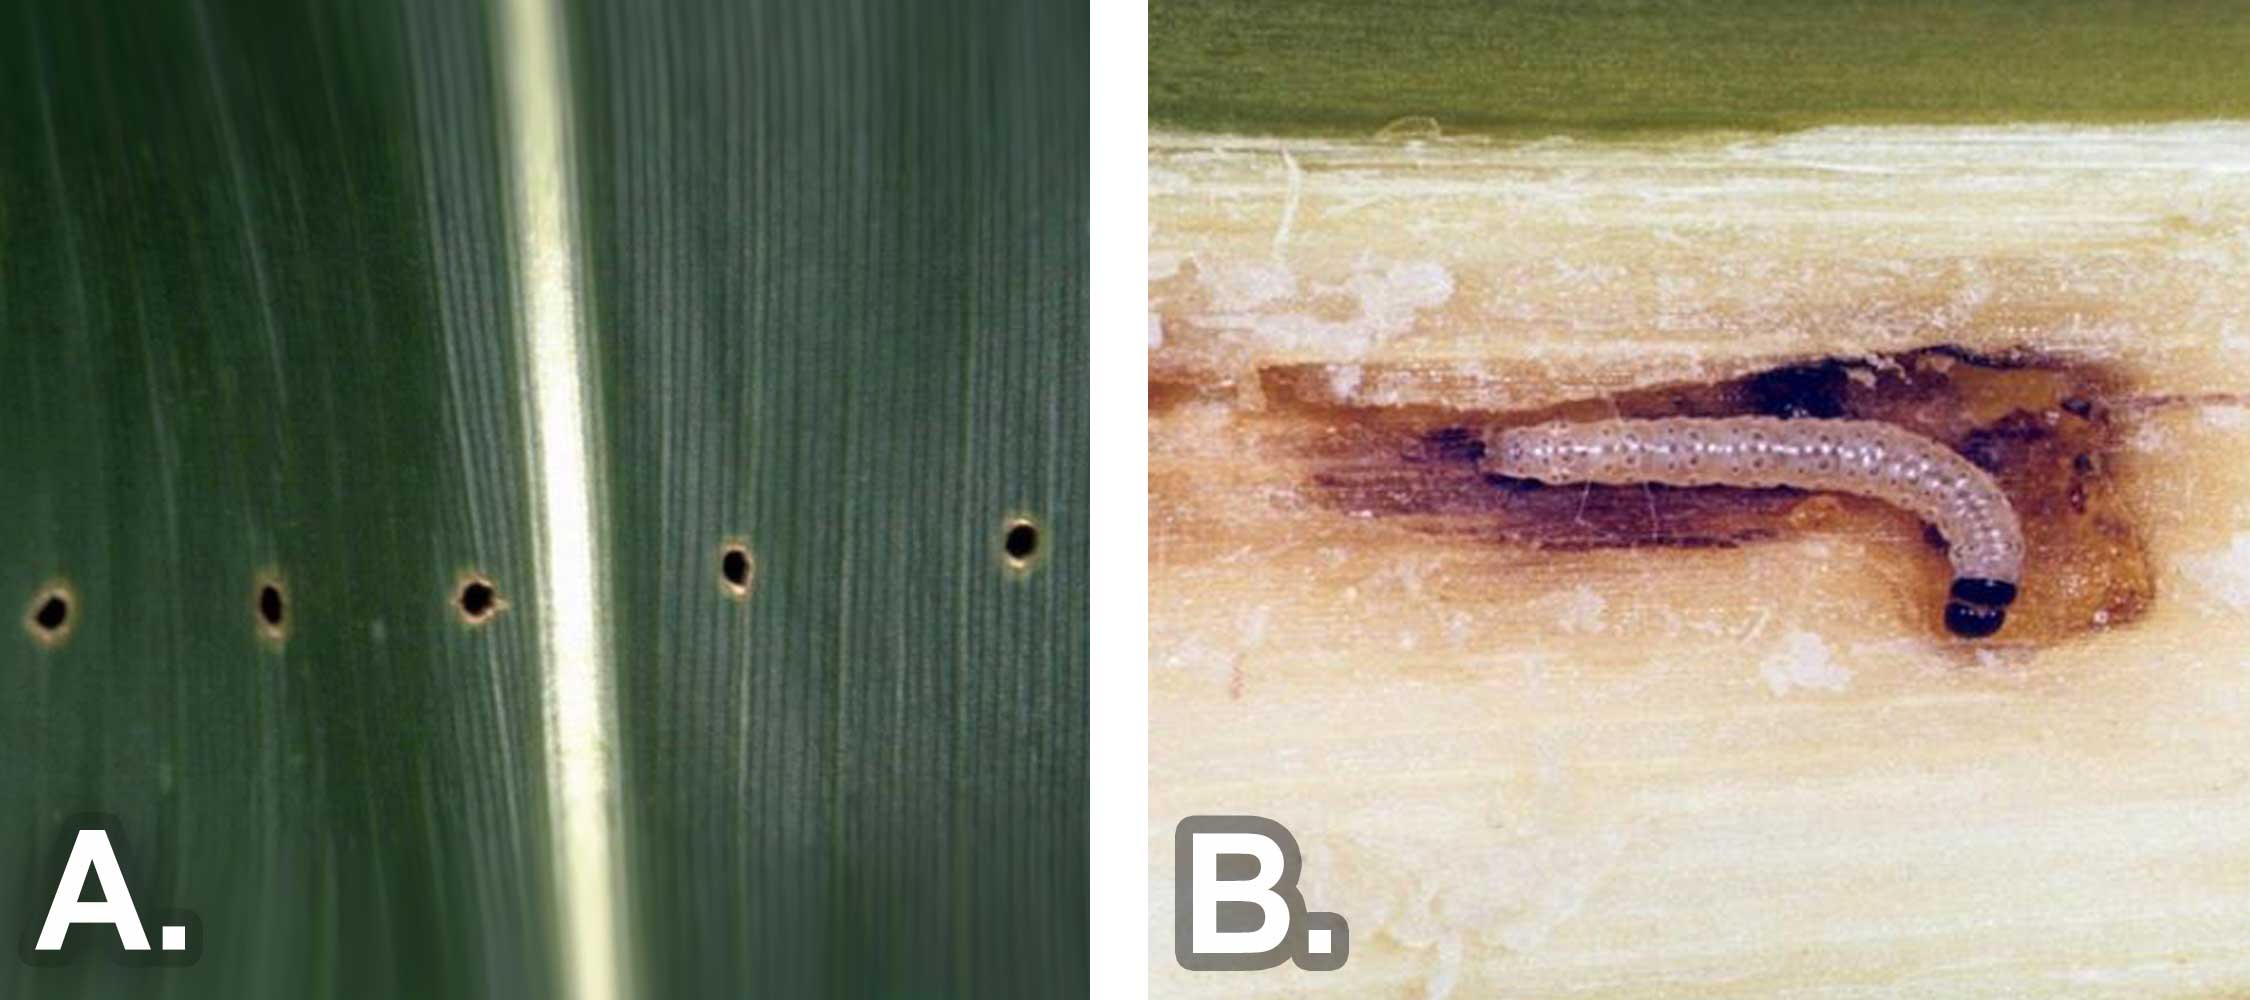 Left: Straight line of evenly spaced small holes in the corn leaf. Right: Small white caterpillar with dark head capsule feeding within a corn stalk.